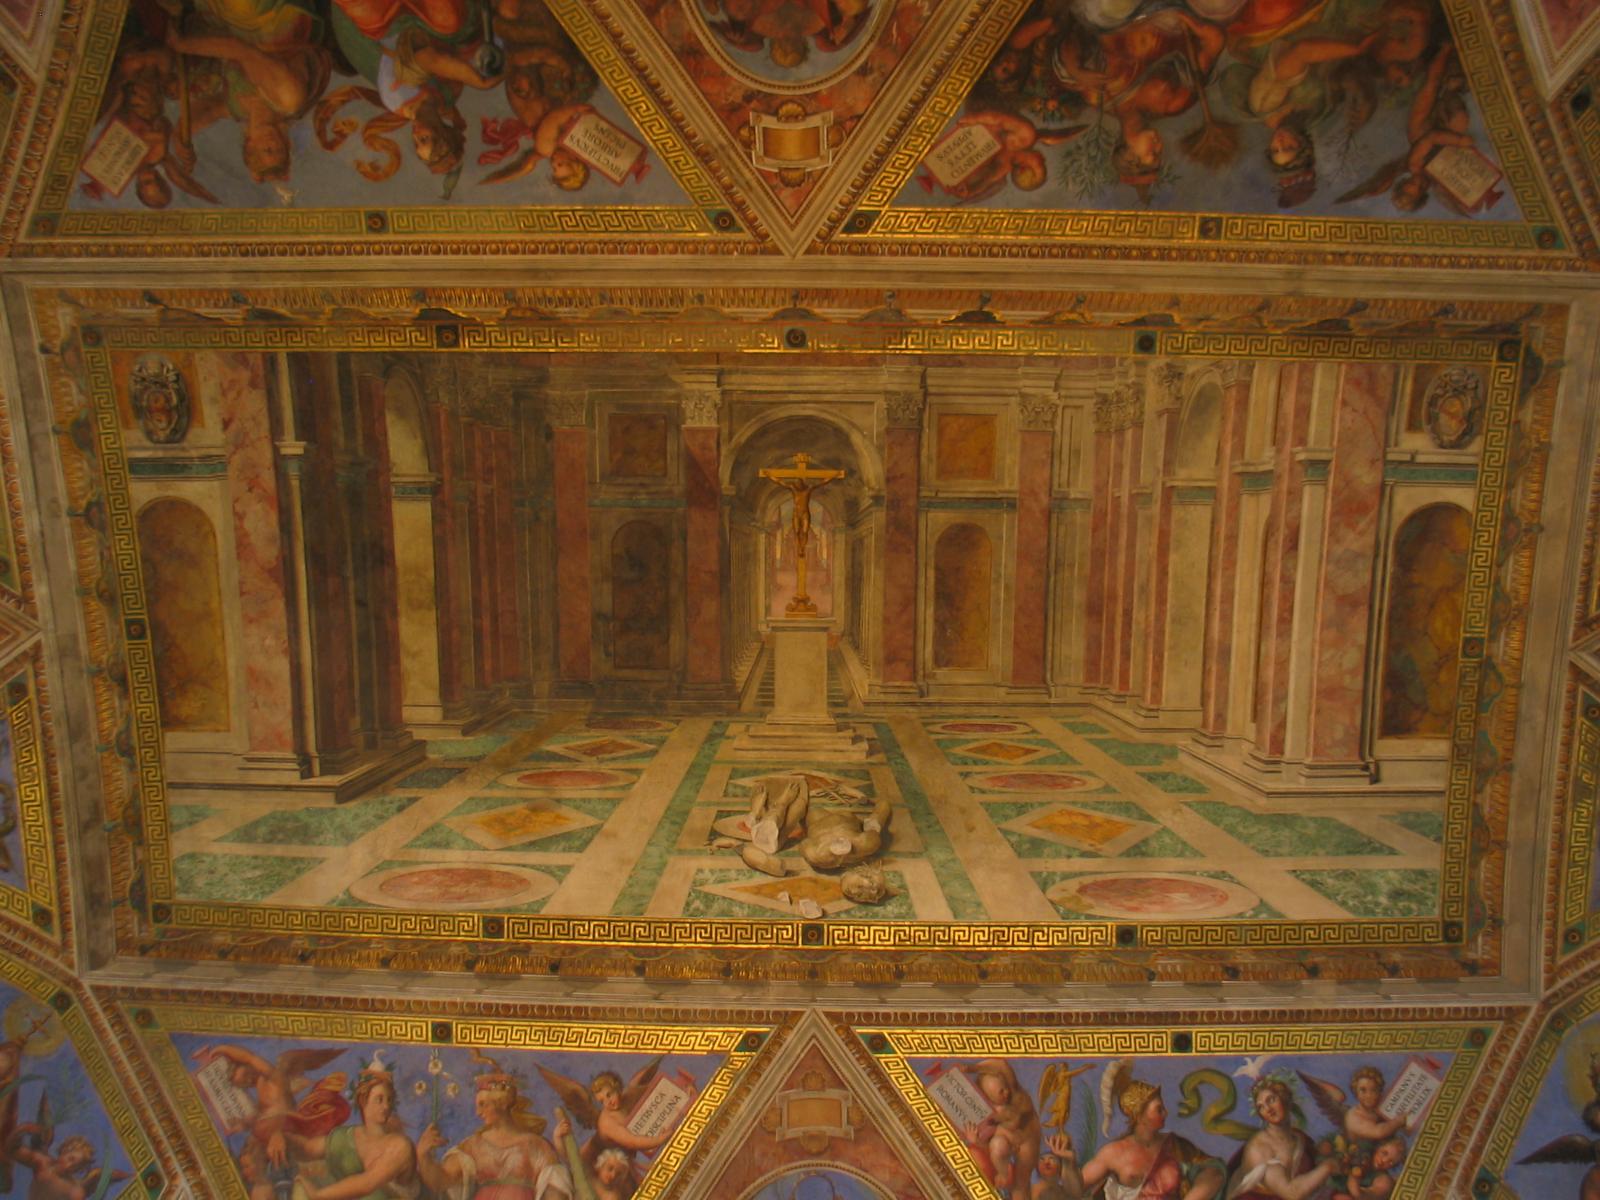 A painting in the Vatican museum